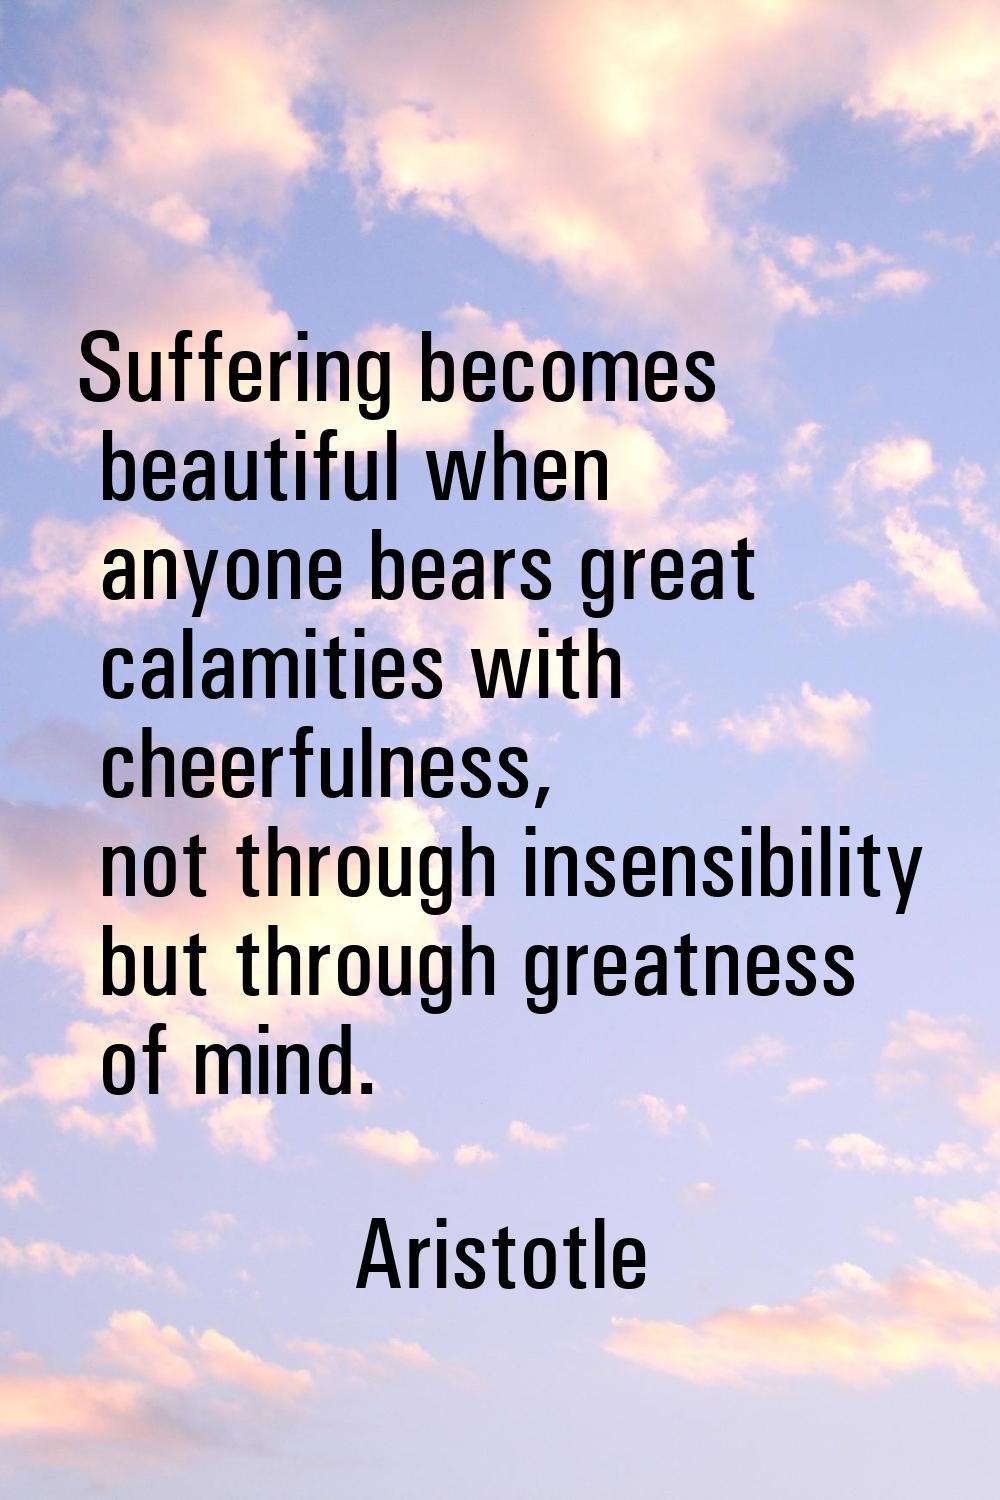 Suffering becomes beautiful when anyone bears great calamities with cheerfulness, not through insen